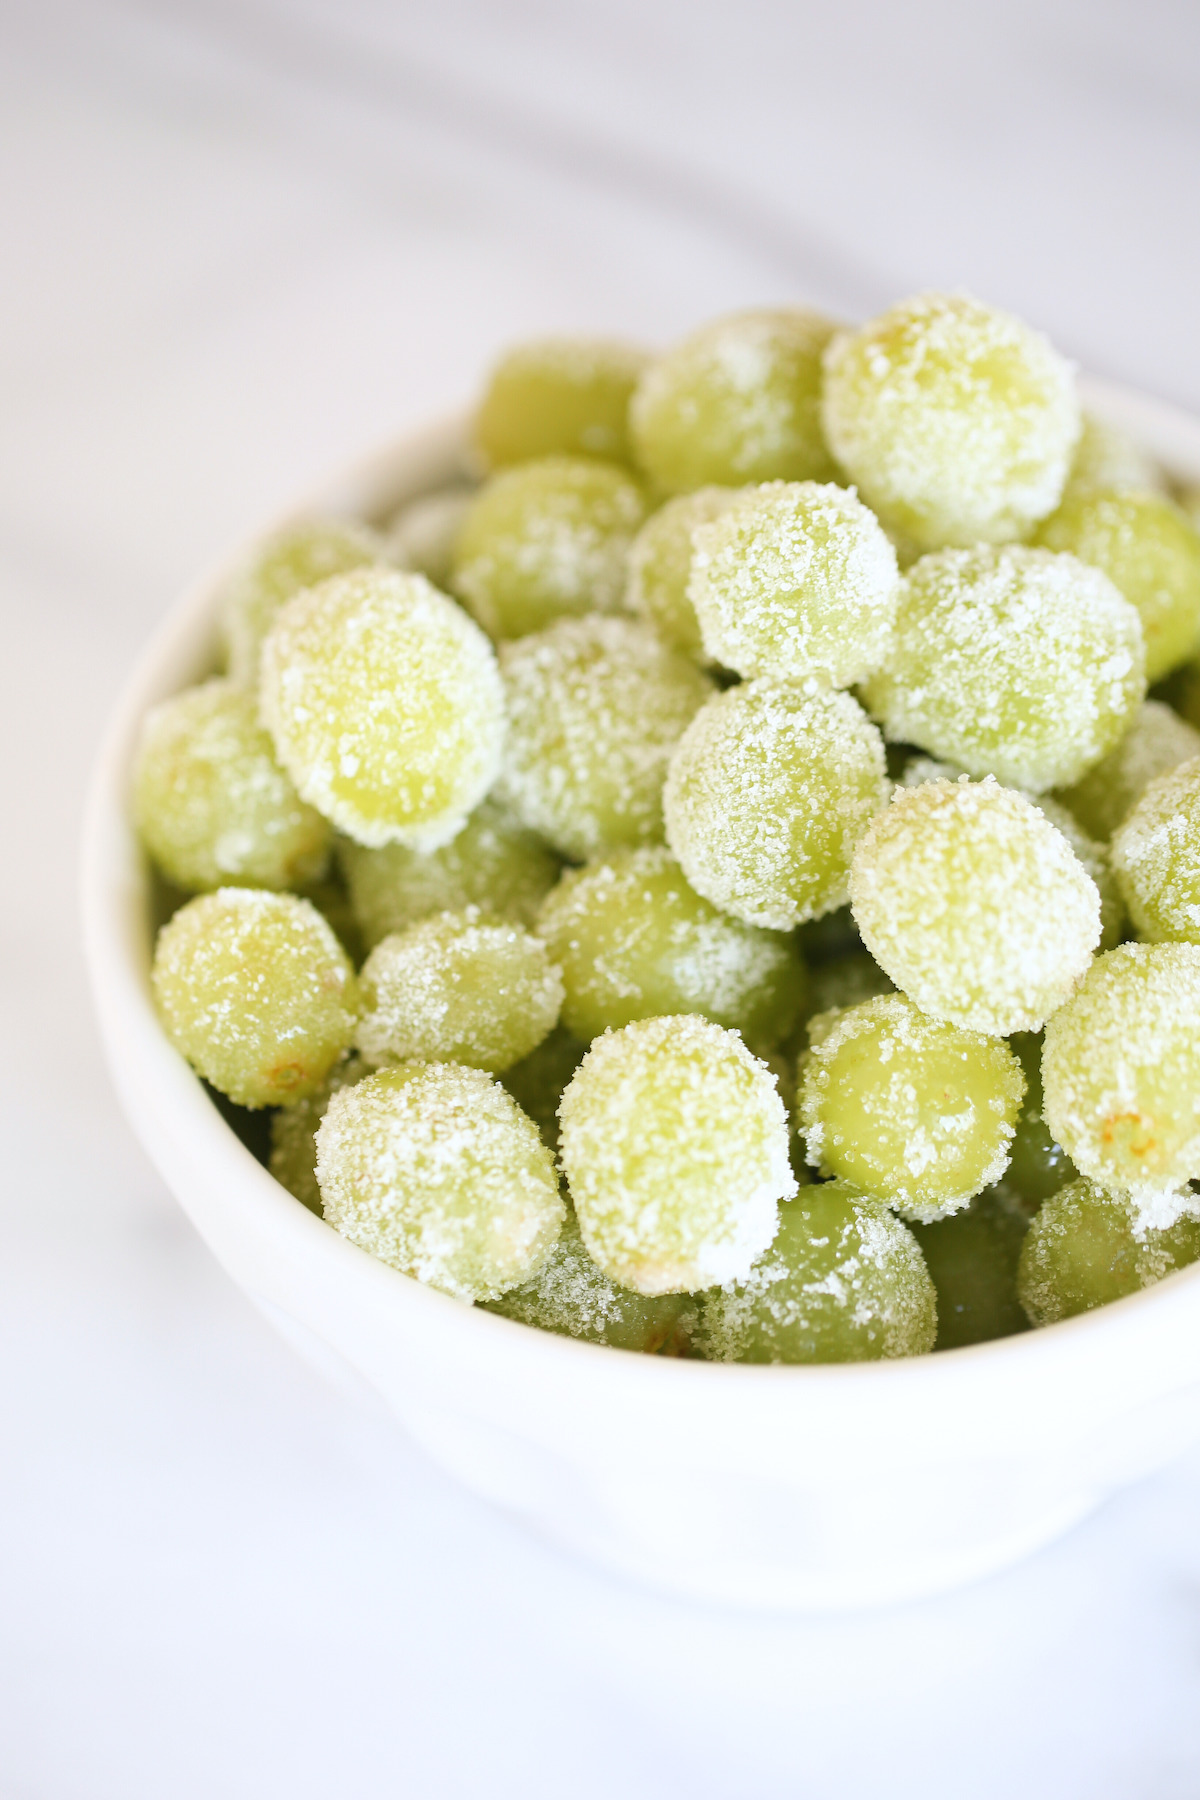 A white bowl of sugared prosecco grapes for a New Year's Eve Menu